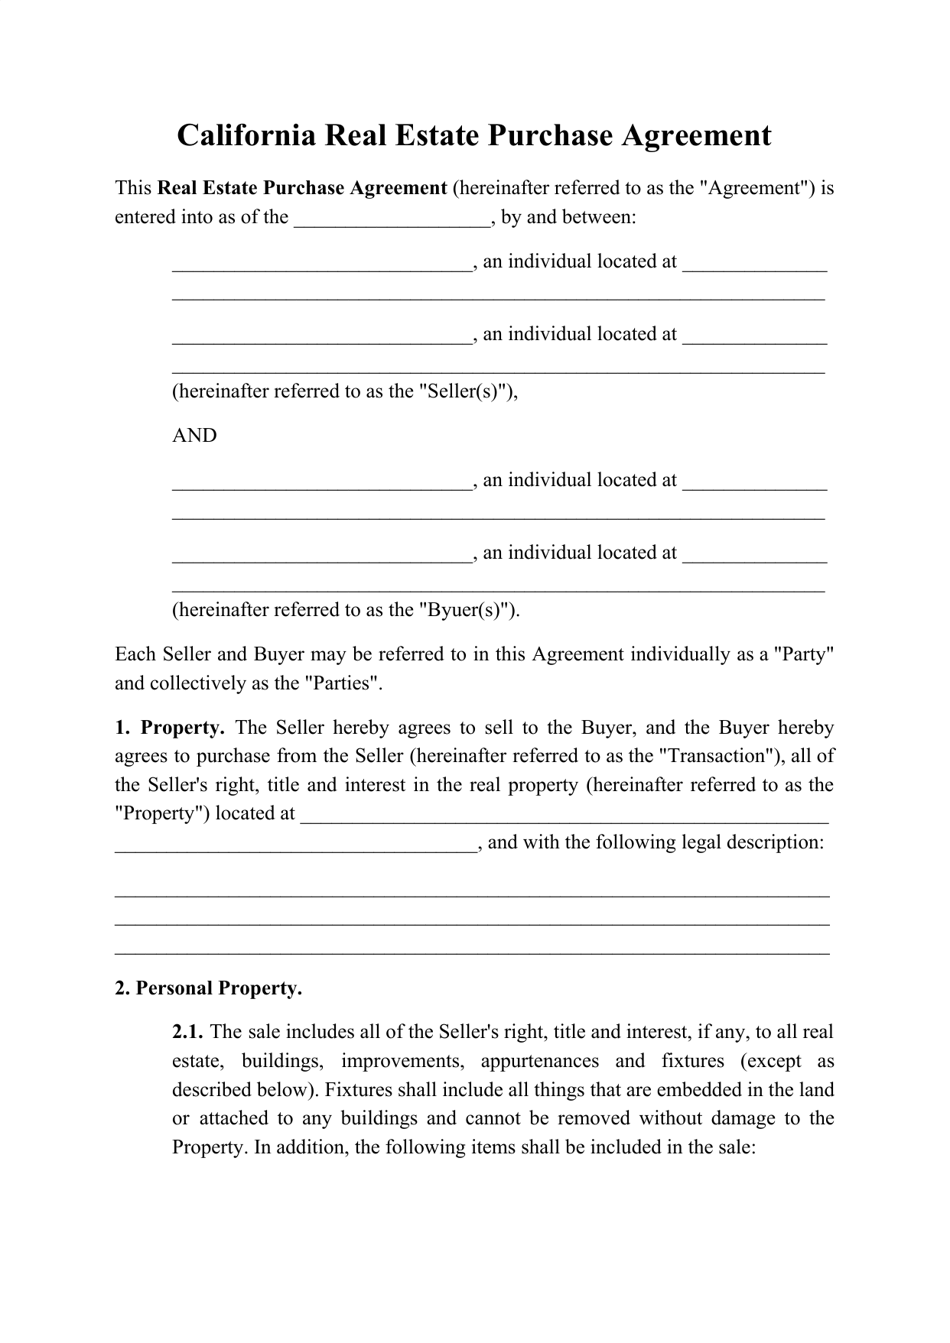 california-real-estate-purchase-agreement-template-fill-out-sign-online-and-download-pdf